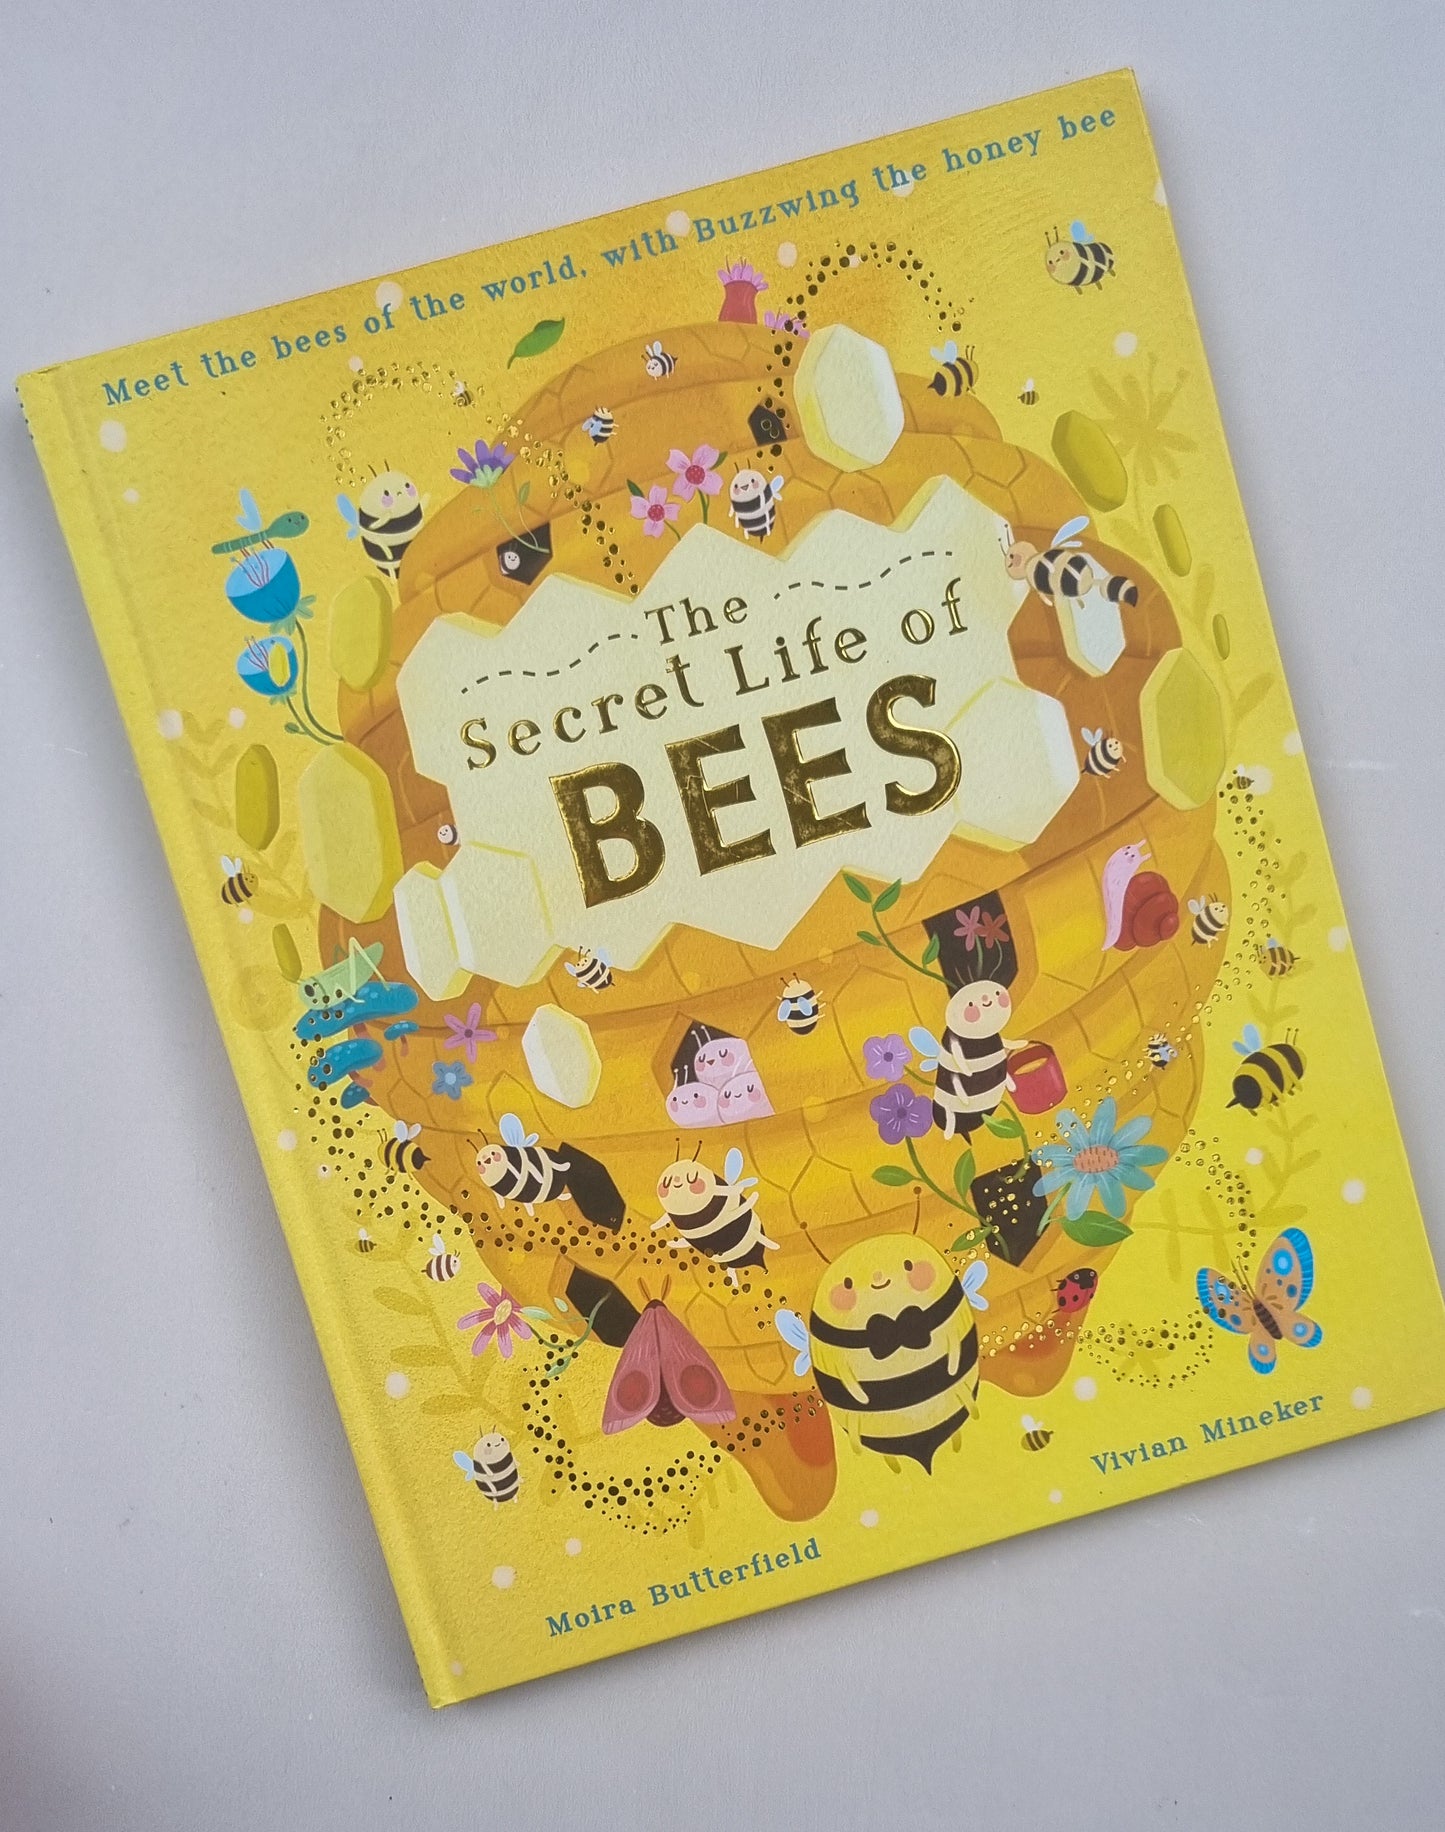 The Secret life of Bees